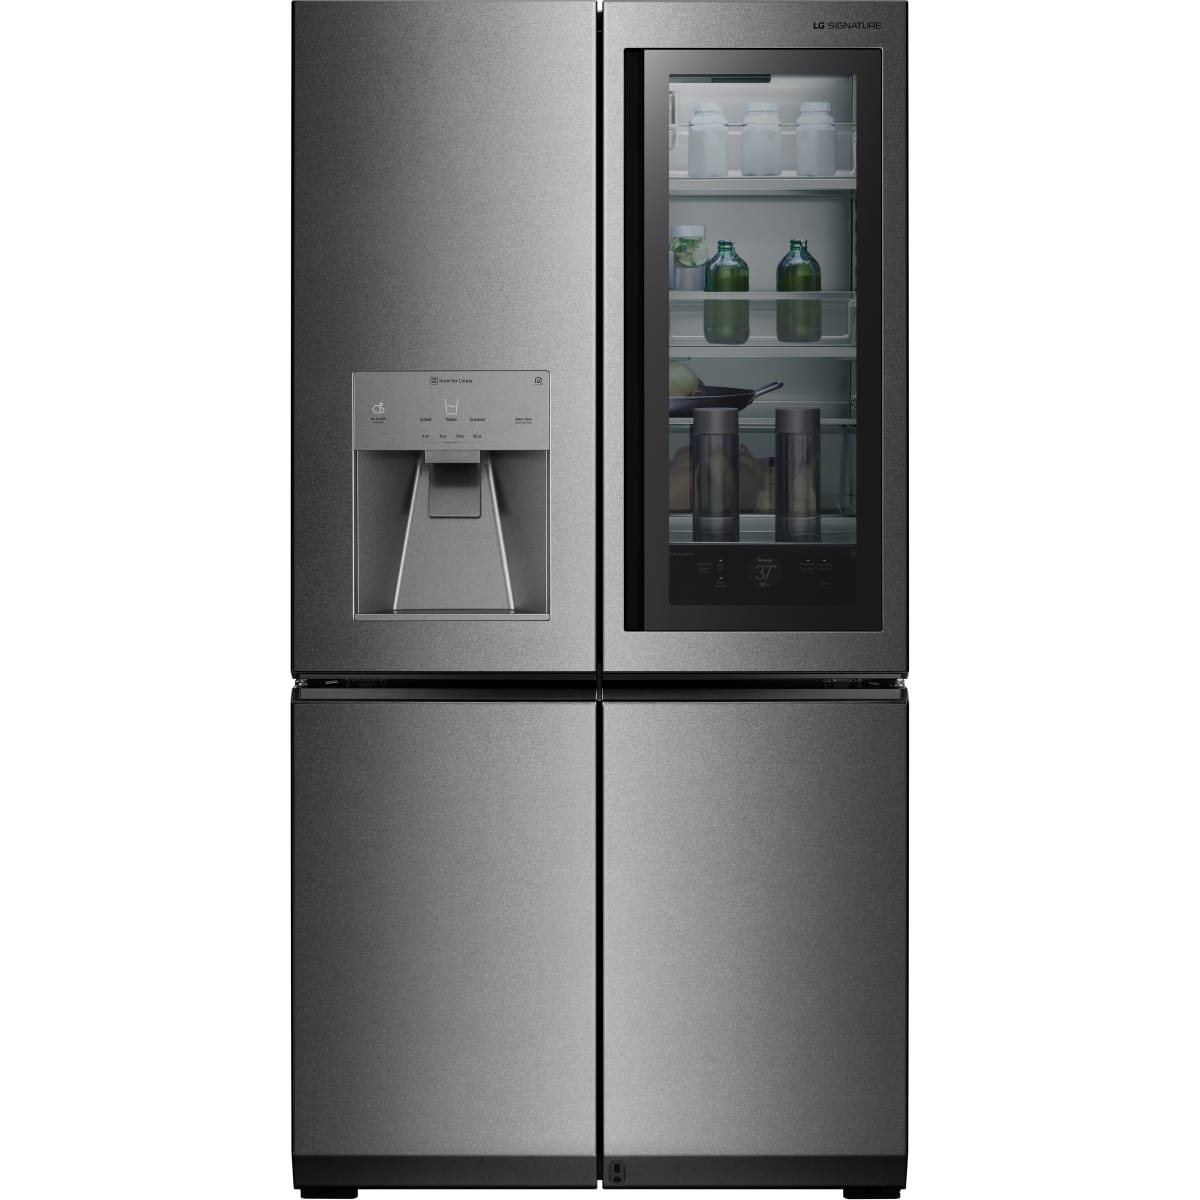 lg-urnts3106n-36-inch-wide-30-8-cu-ft-energy-star-rated-build